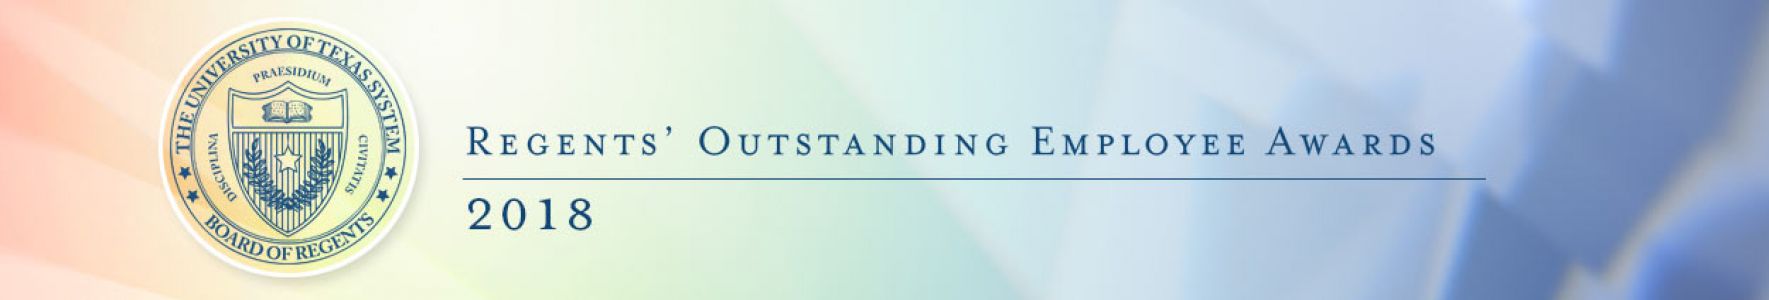 text: Regents' Outstanding Employee Awards 2018.  Header image with text and Board seal on a colored background